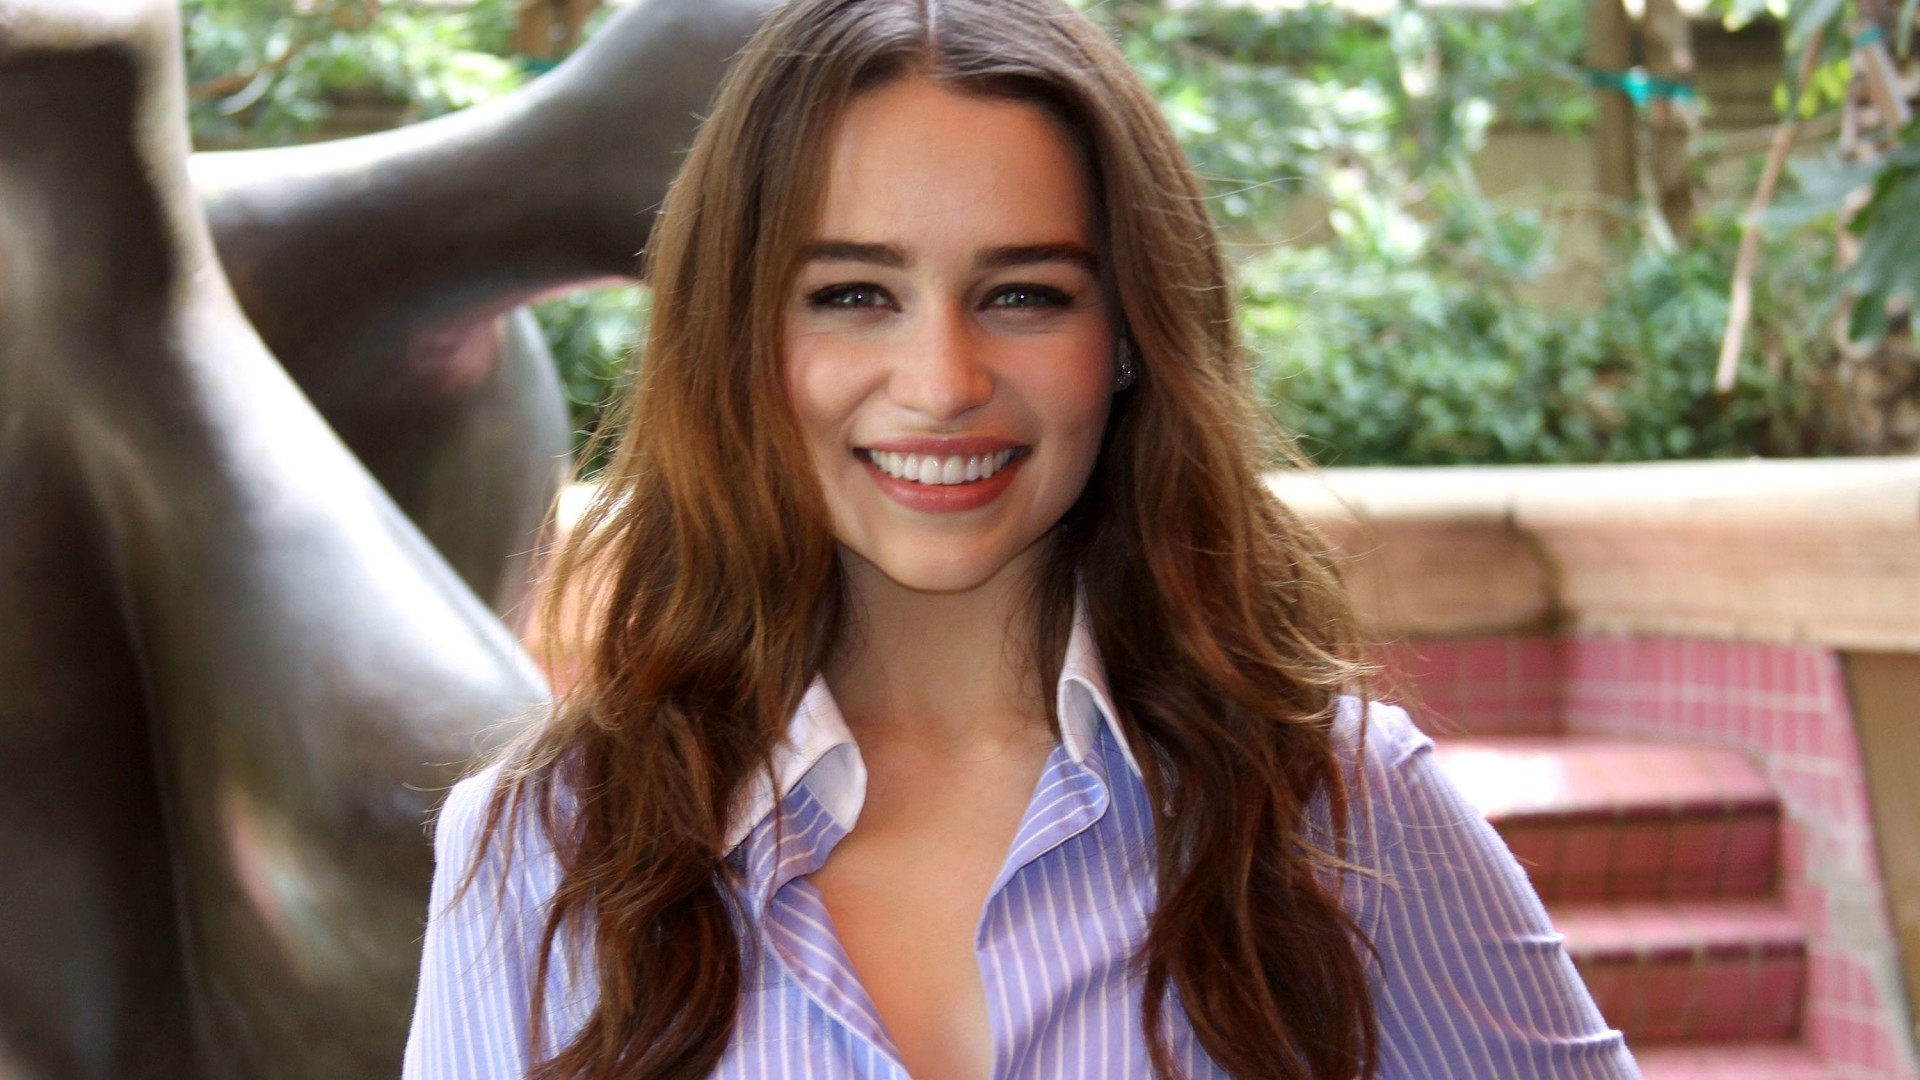 emilia clarke hd wallpapers,hair,facial expression,beauty,hairstyle,smile